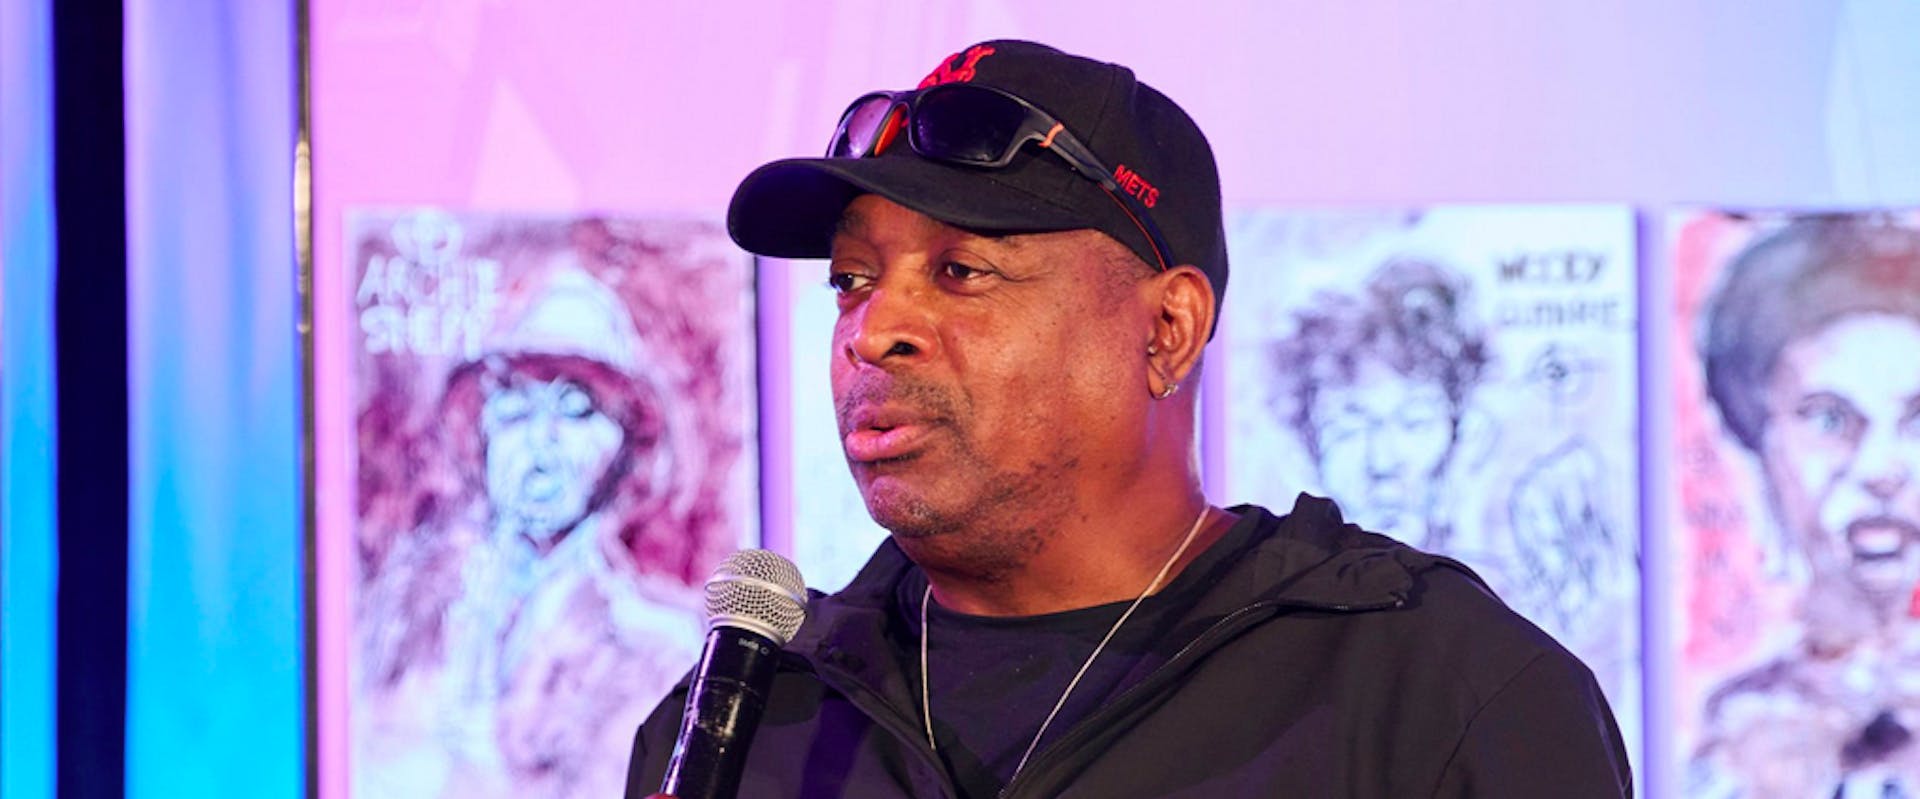 TORONTO, ONTARIO - JUNE 09: Chuck D at the 40th Anniversary Of Canadian Music Week at Intercontinental Hotel on June 09, 2022 in Toronto, Ontario. 